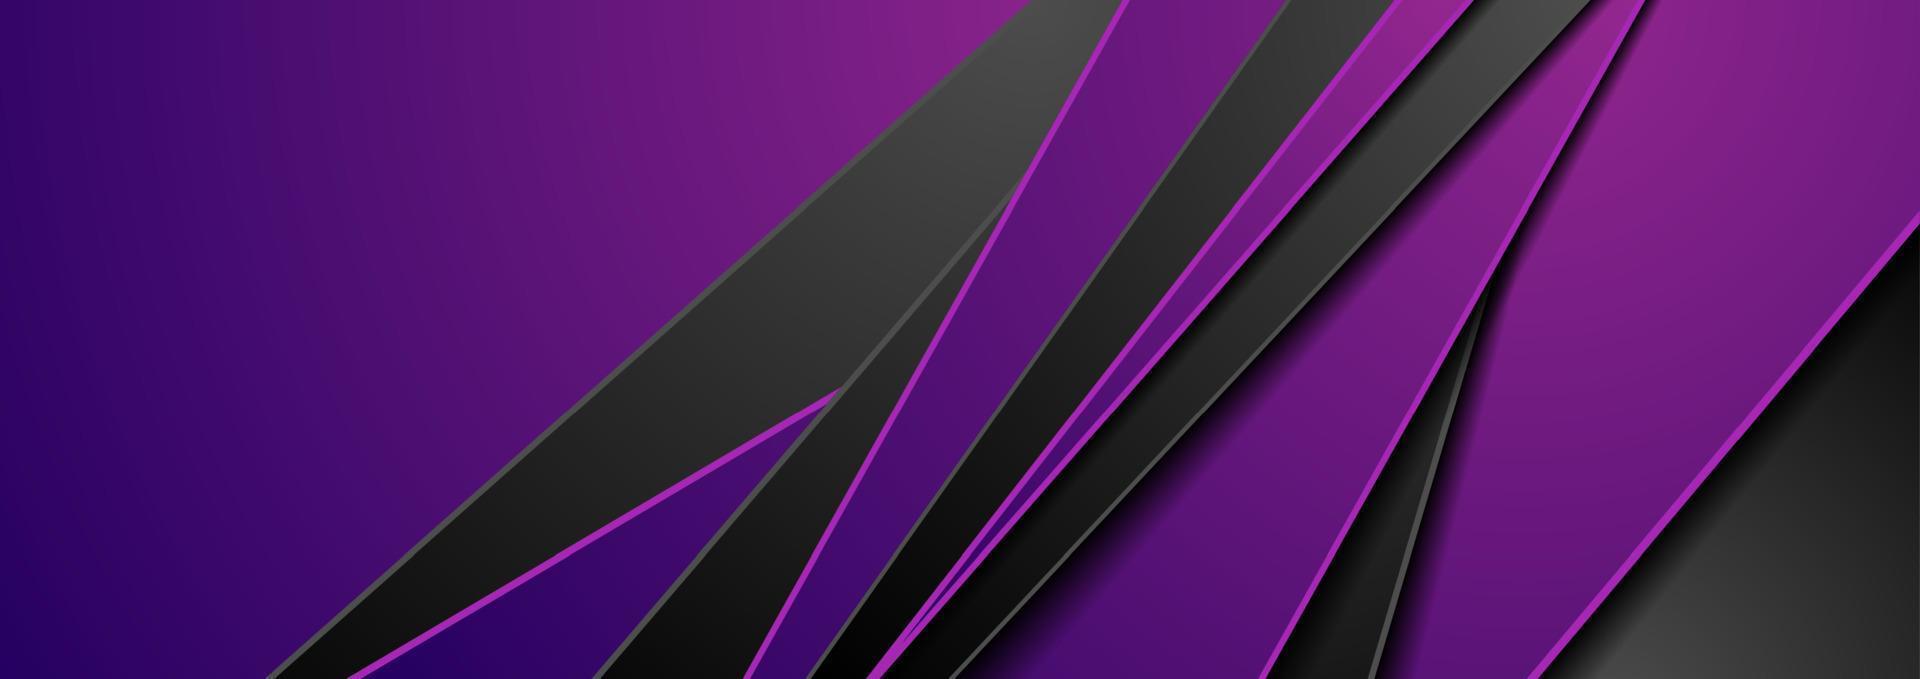 Violet and black abstract corporate geometric tech background vector